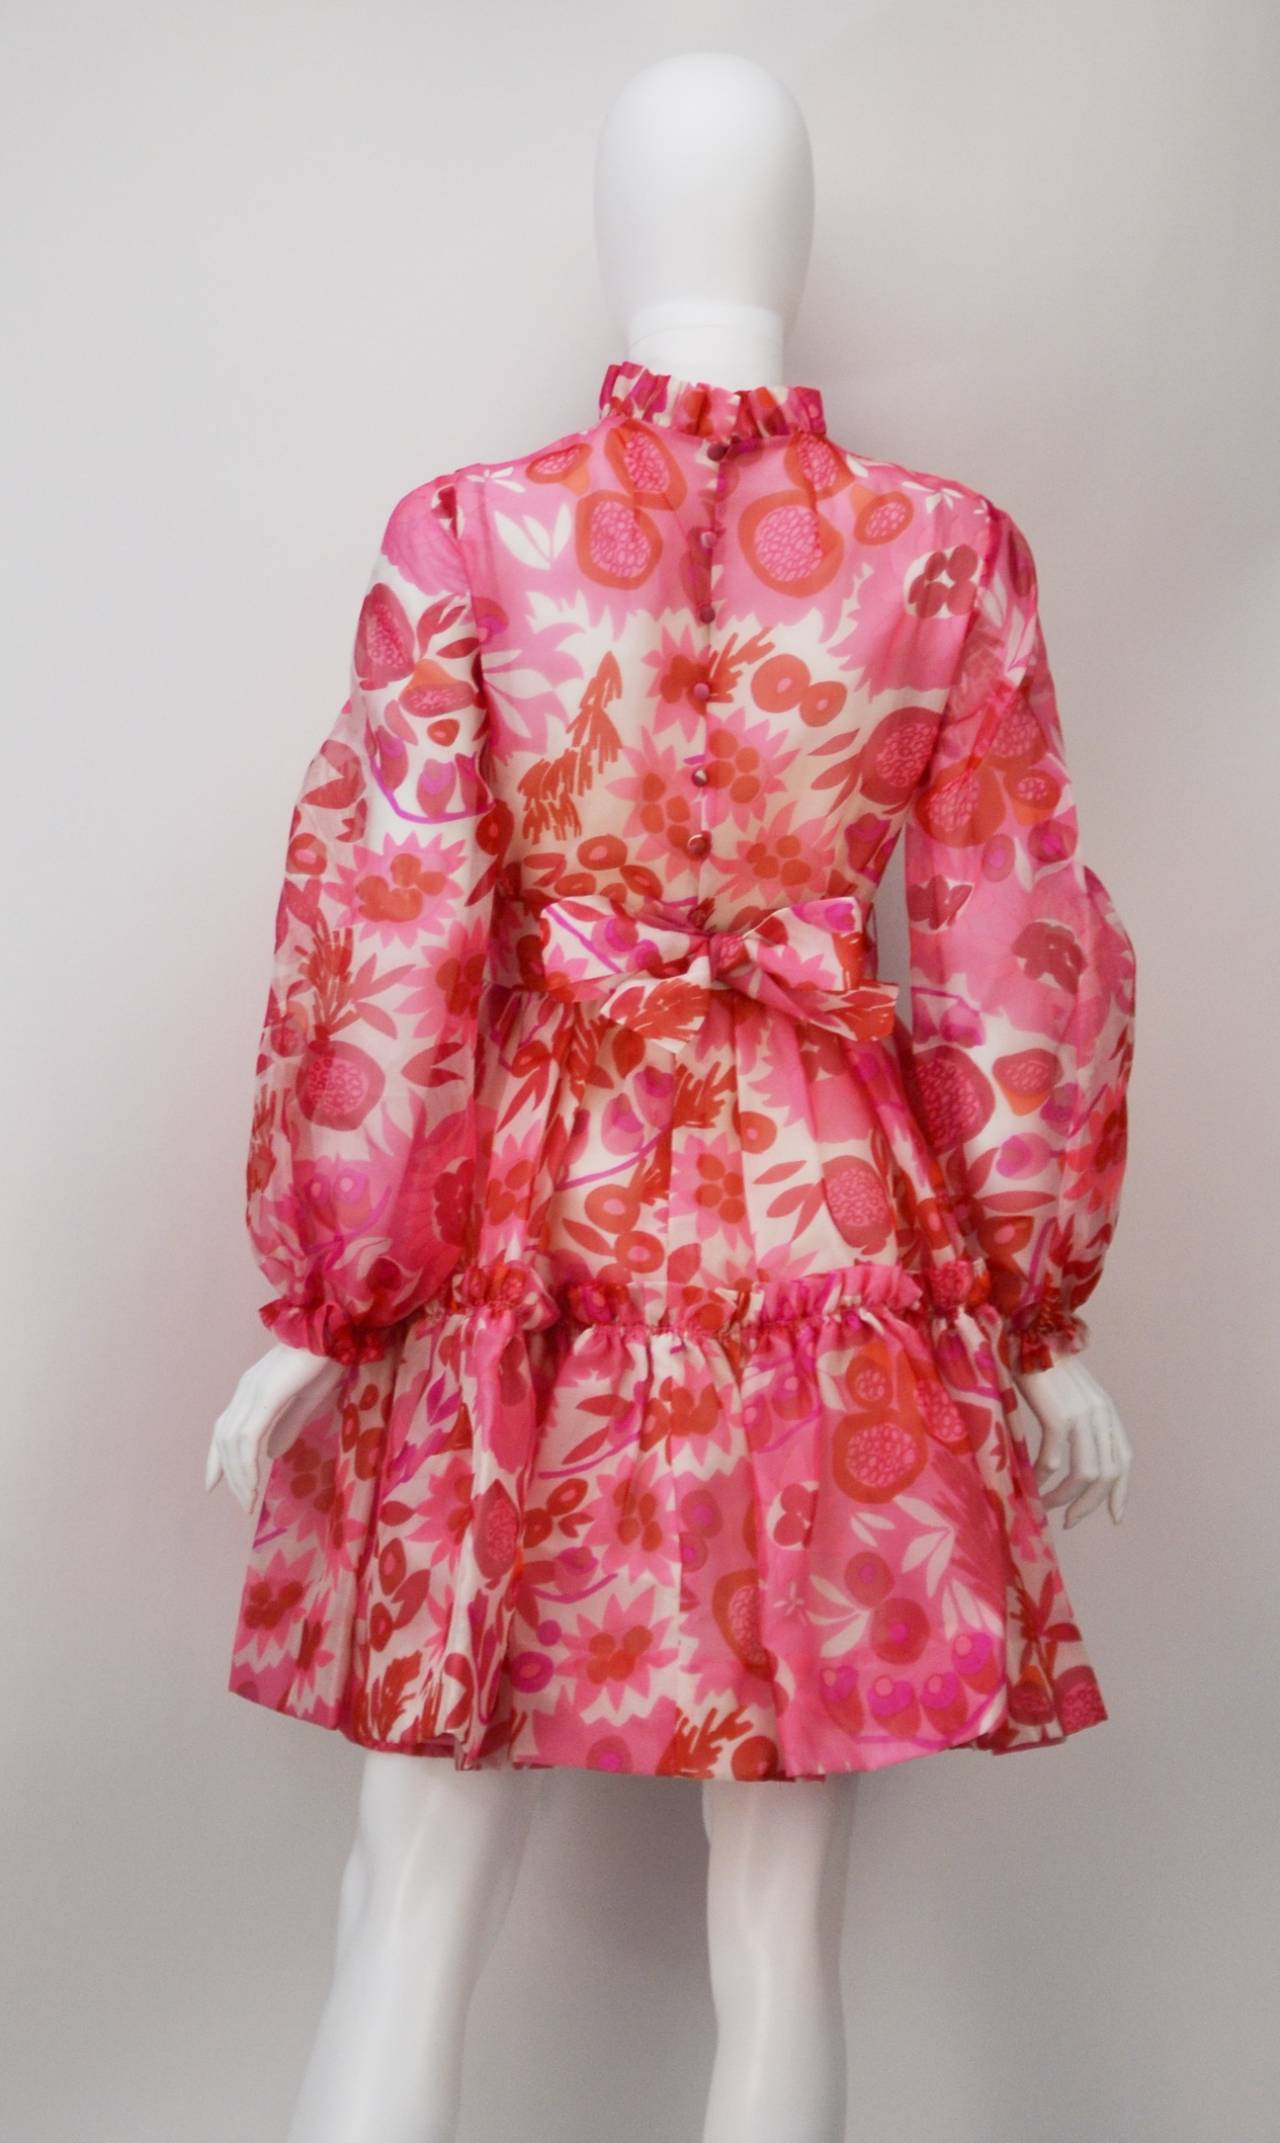 This fun and fantastic 1960's dress is one of Parnis's greatest works. (Worth seeing in person as pictures do not do the dress justice) Mrs.Couture staff is fighting over which model/actress will purchase this dress.  Is it you?

Parnis blends